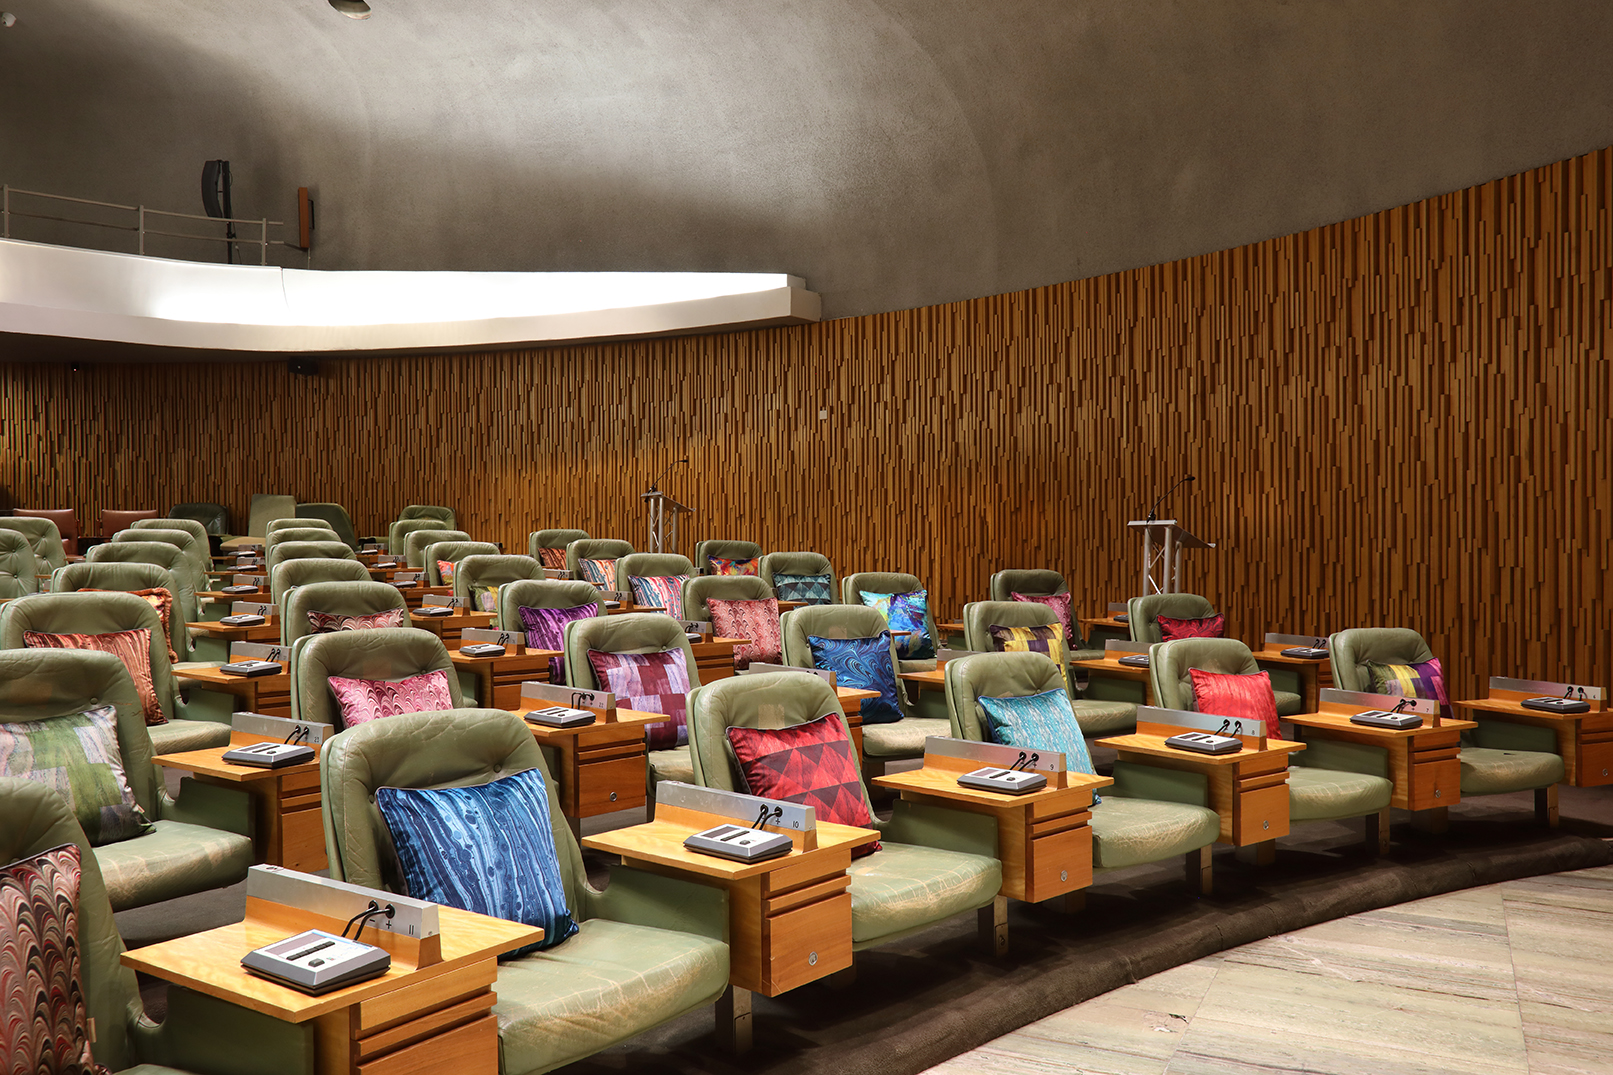 Circular council chamber at Newcastle Civic Centre with Susi Bellamy's cushions on every seat.